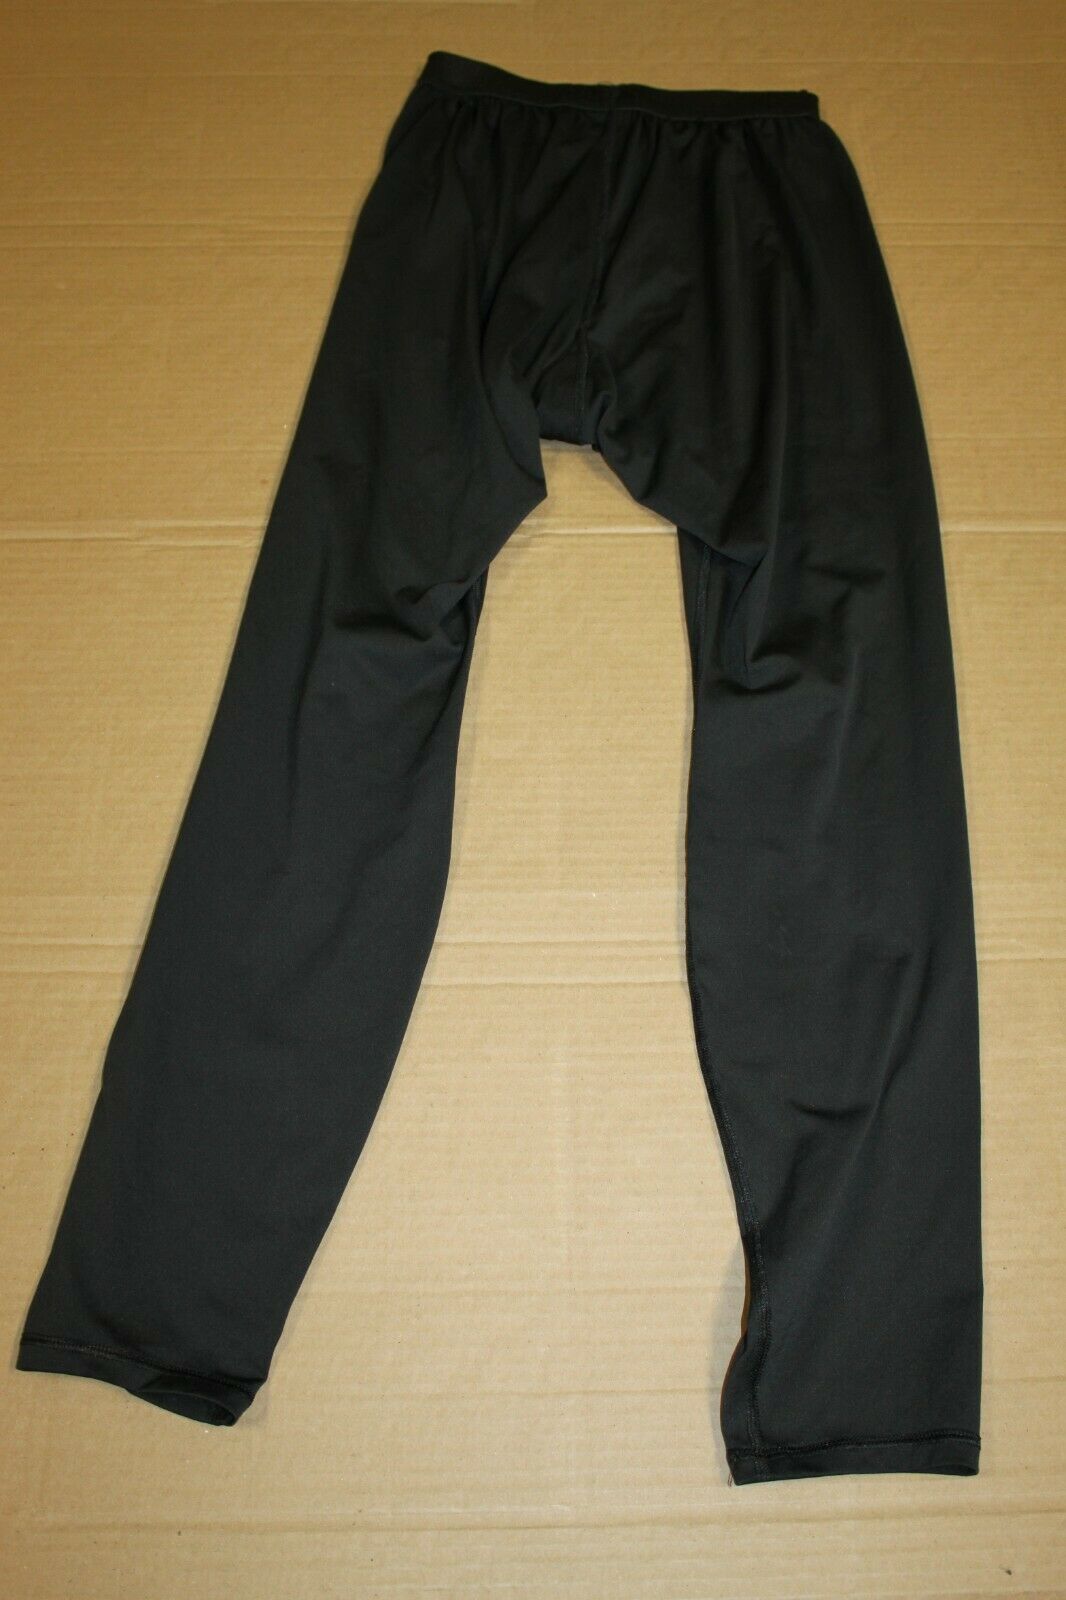 US Polartec Layer 1 Silkweight Long Thermals (USED)